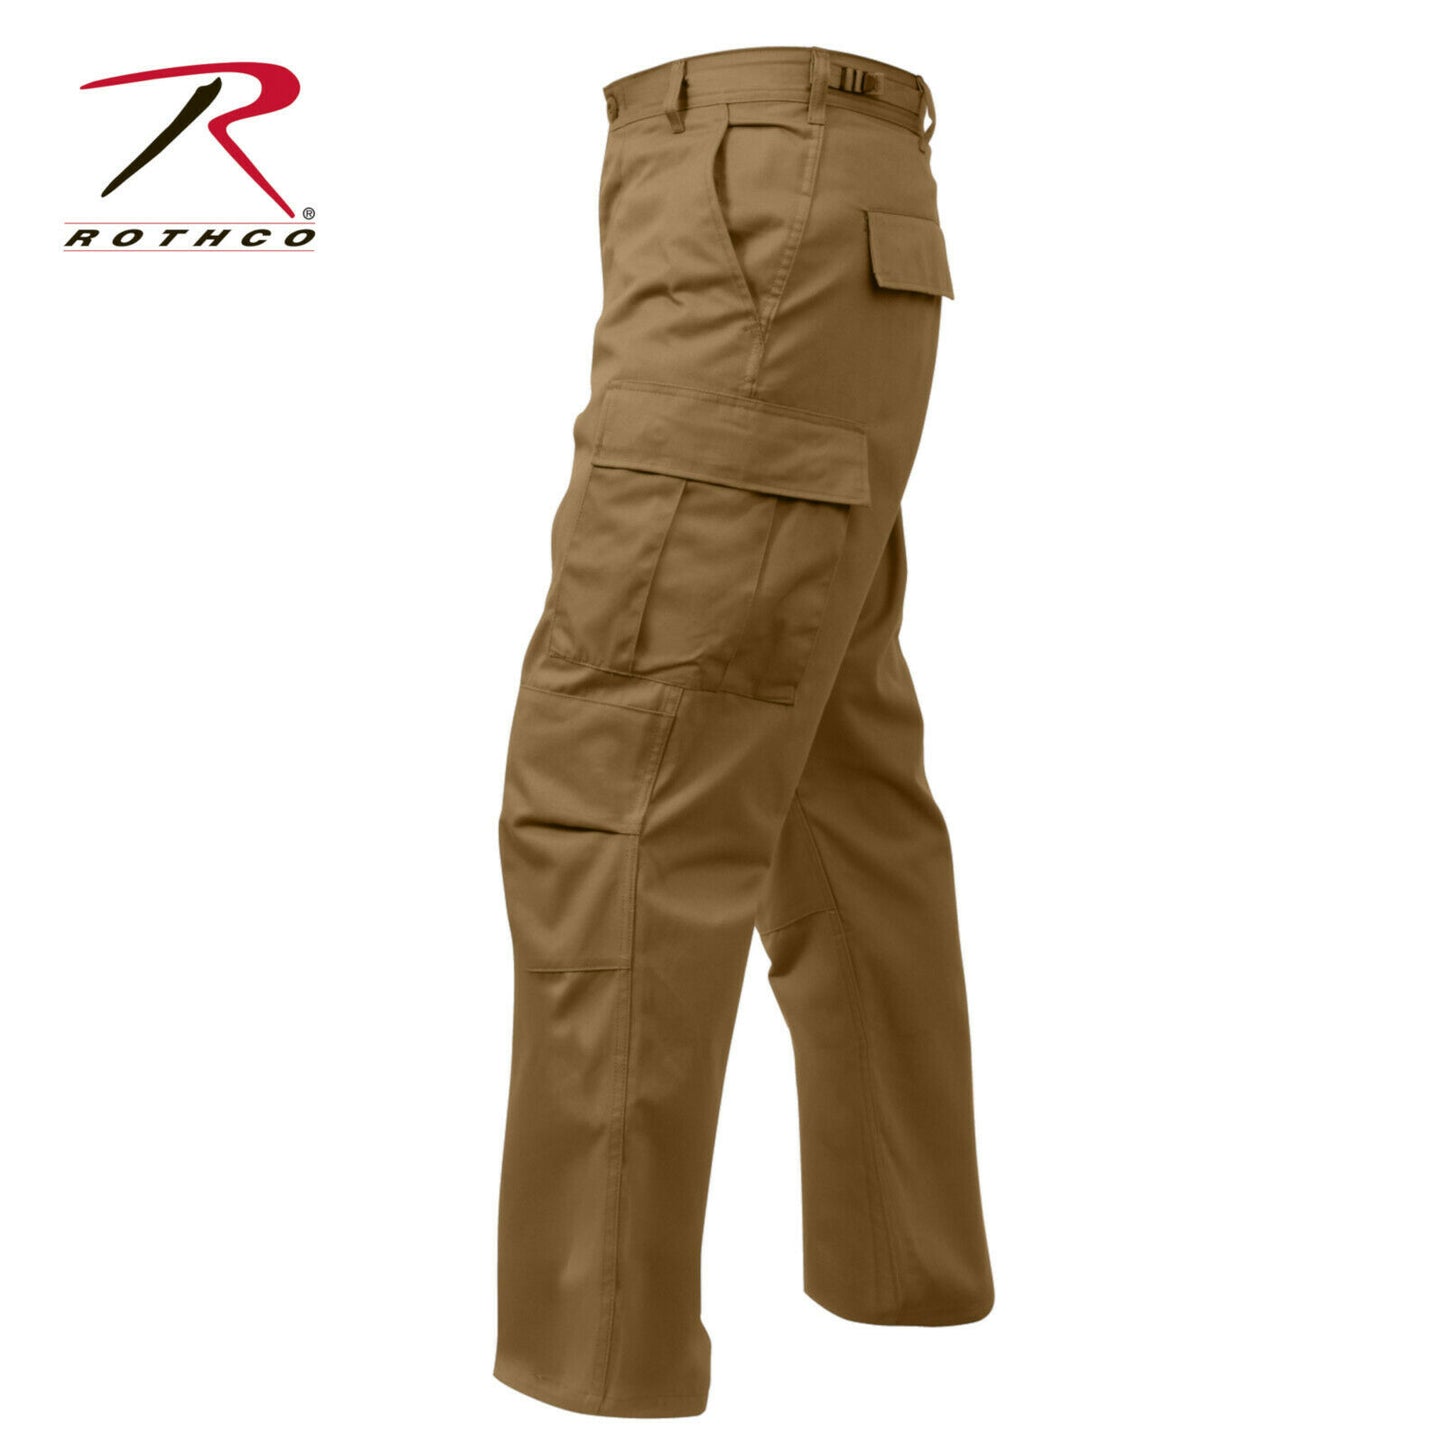 Rothco Relaxed Fit Zipper Fly BDU Pants - Coyote Brown Cargo Fatigues